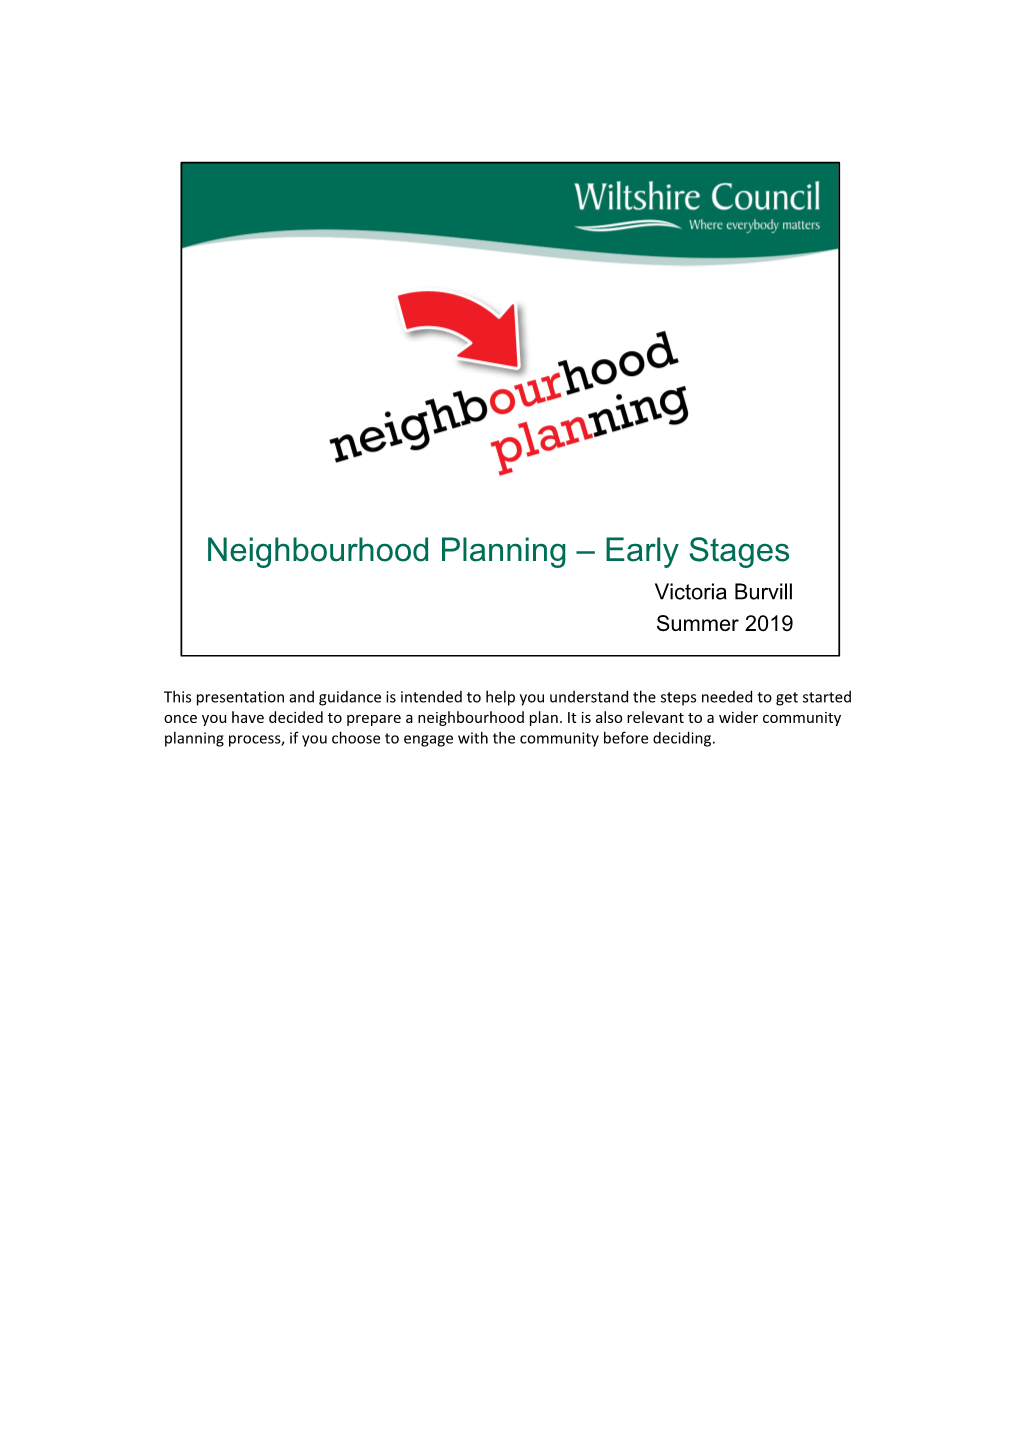 Neighbourhood Planning – Early Stages Victoria Burvill Summer 2019